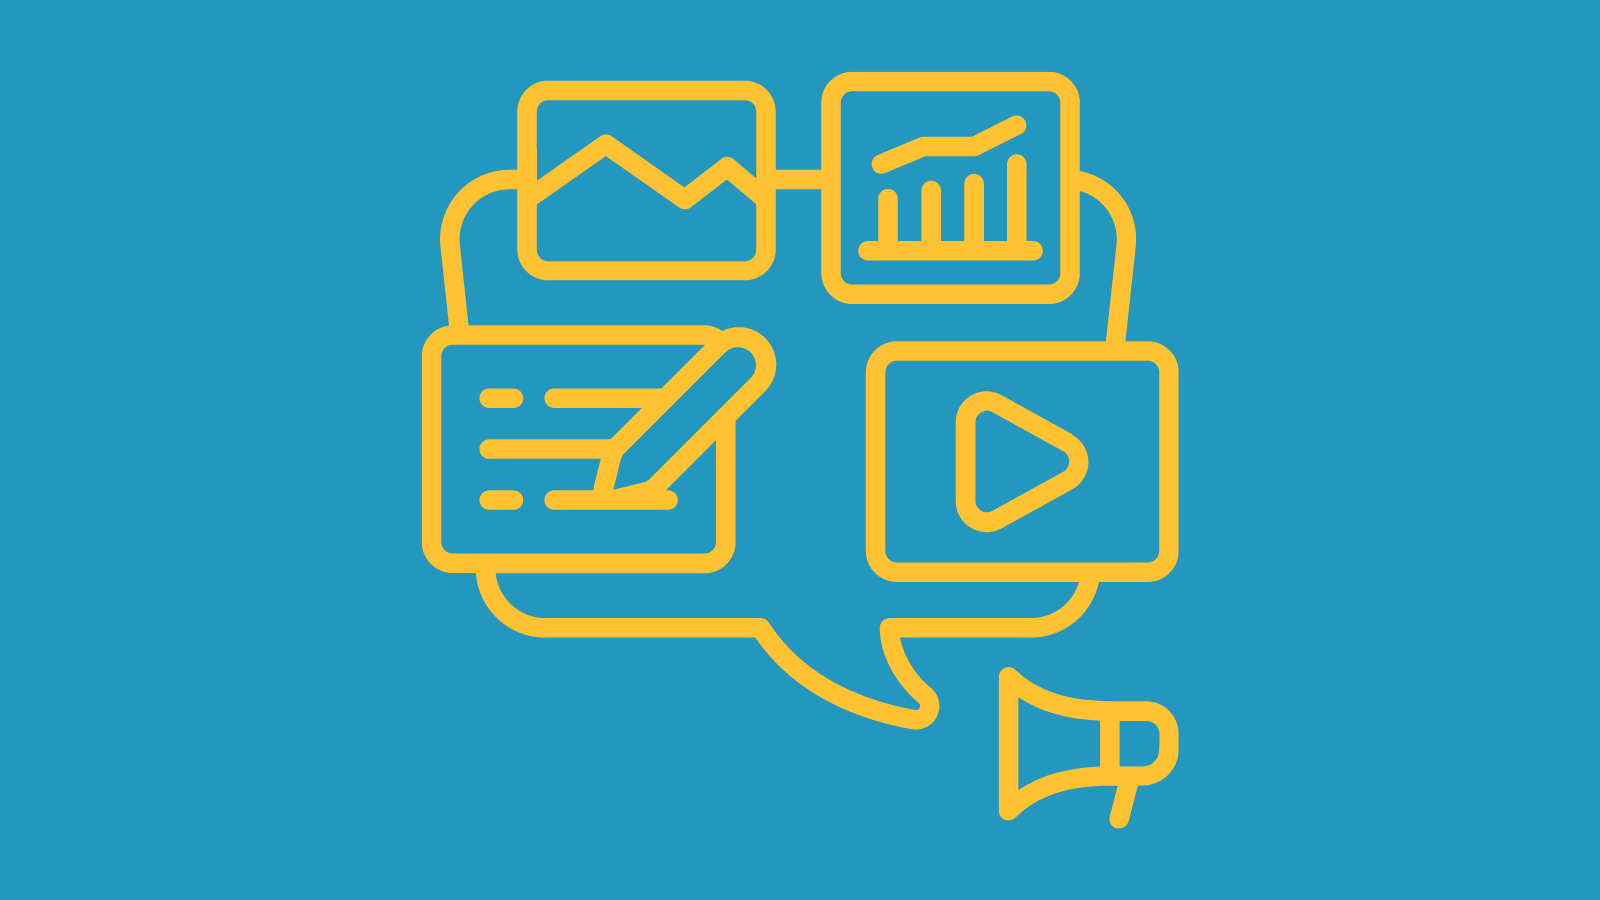 A large speech bubble filled with a notebook, a photo icon, a graph, and a video icon pointing to a small megaphone